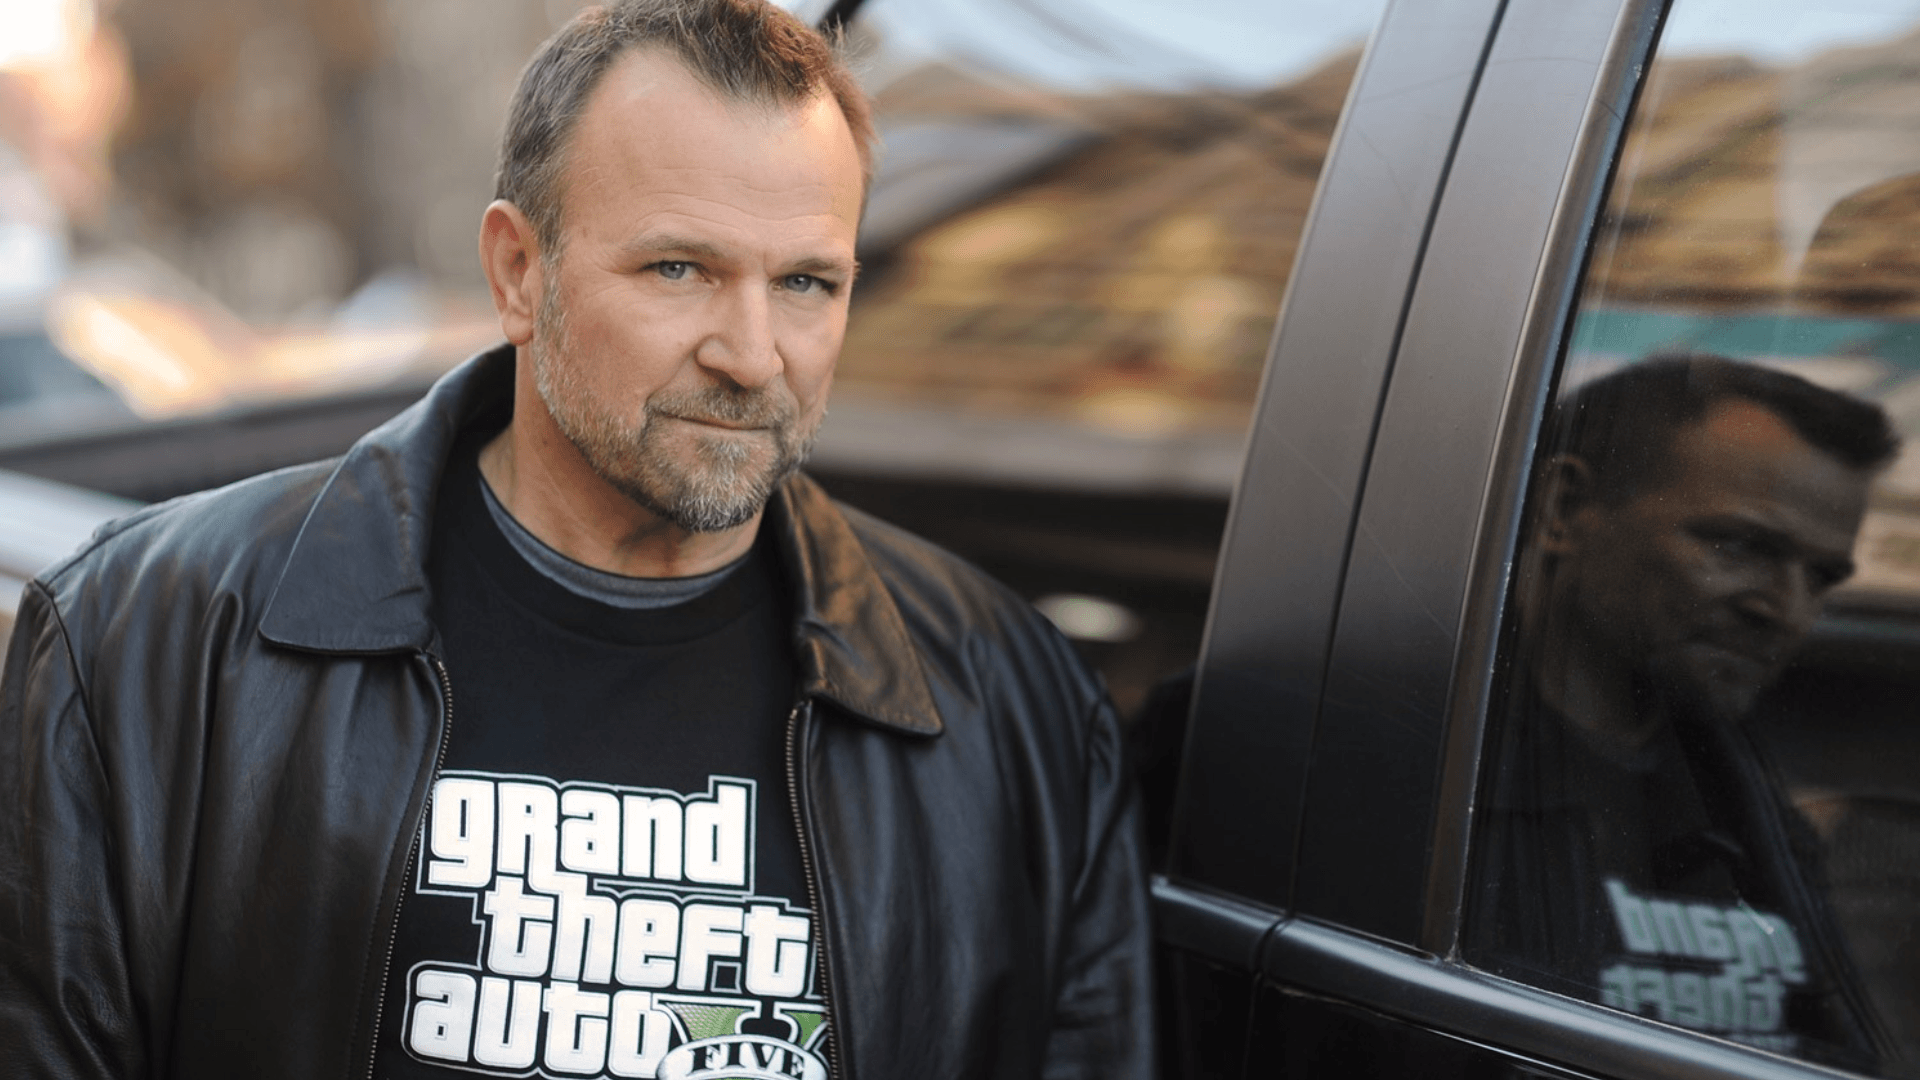 GTA 5 Actor Swatted During A Livestream On Thanksgiving, But He Is Not The First